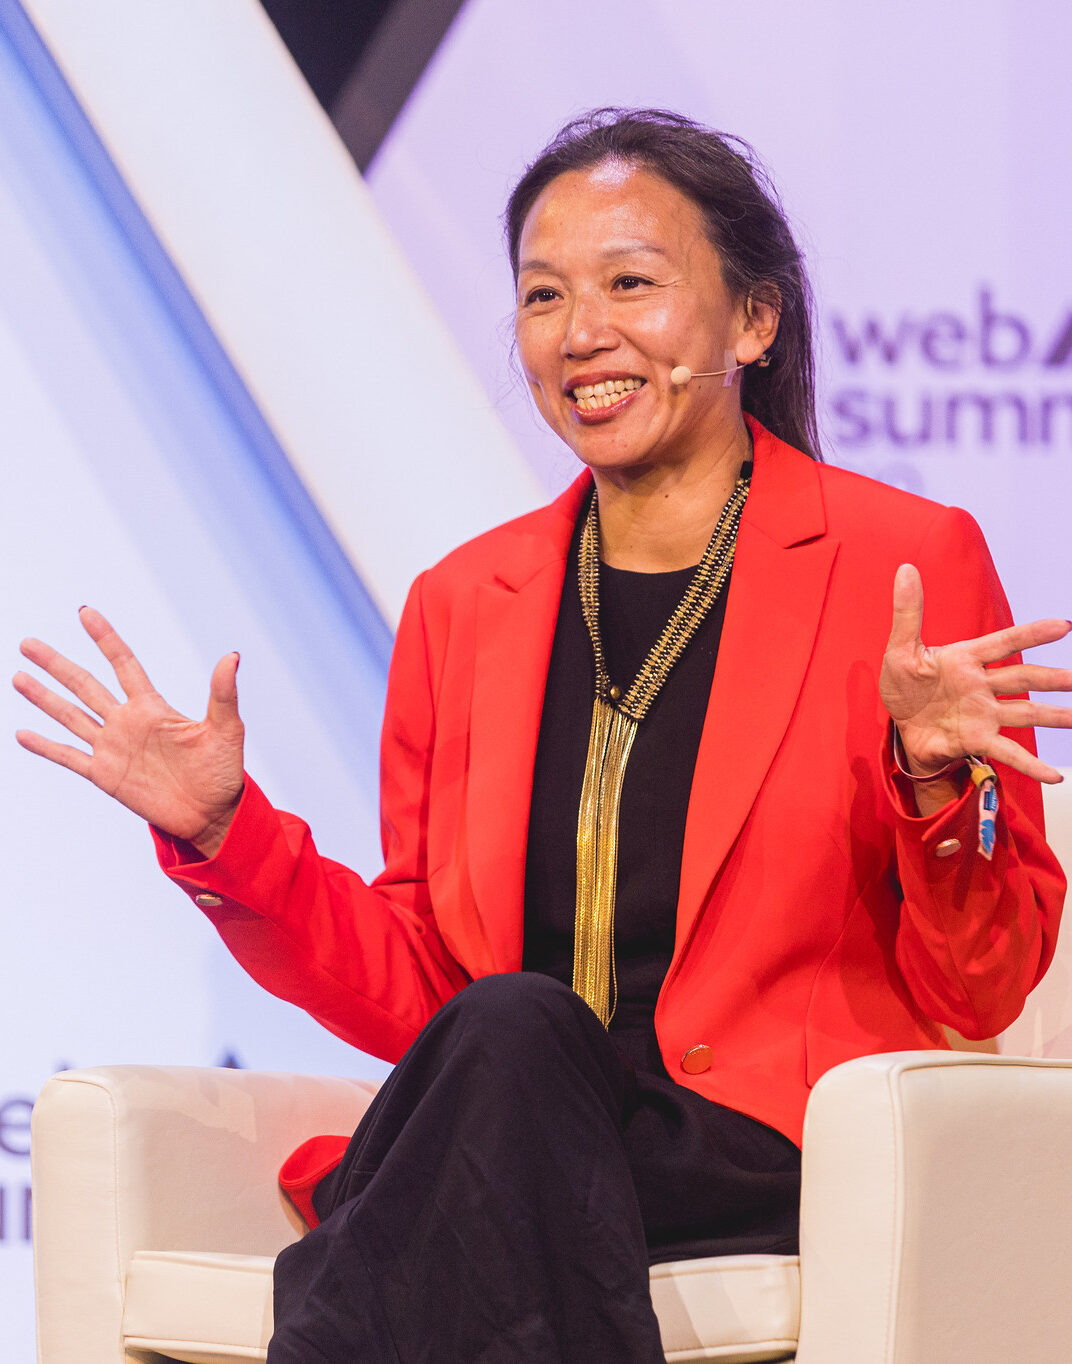 Photograph of a person (Bedy Yang of 500 Global) sitting on a chair onstage at Web Summit Rio. The person appears to be speaking and is gesturing with their hands. They are wearing a headset microphone.